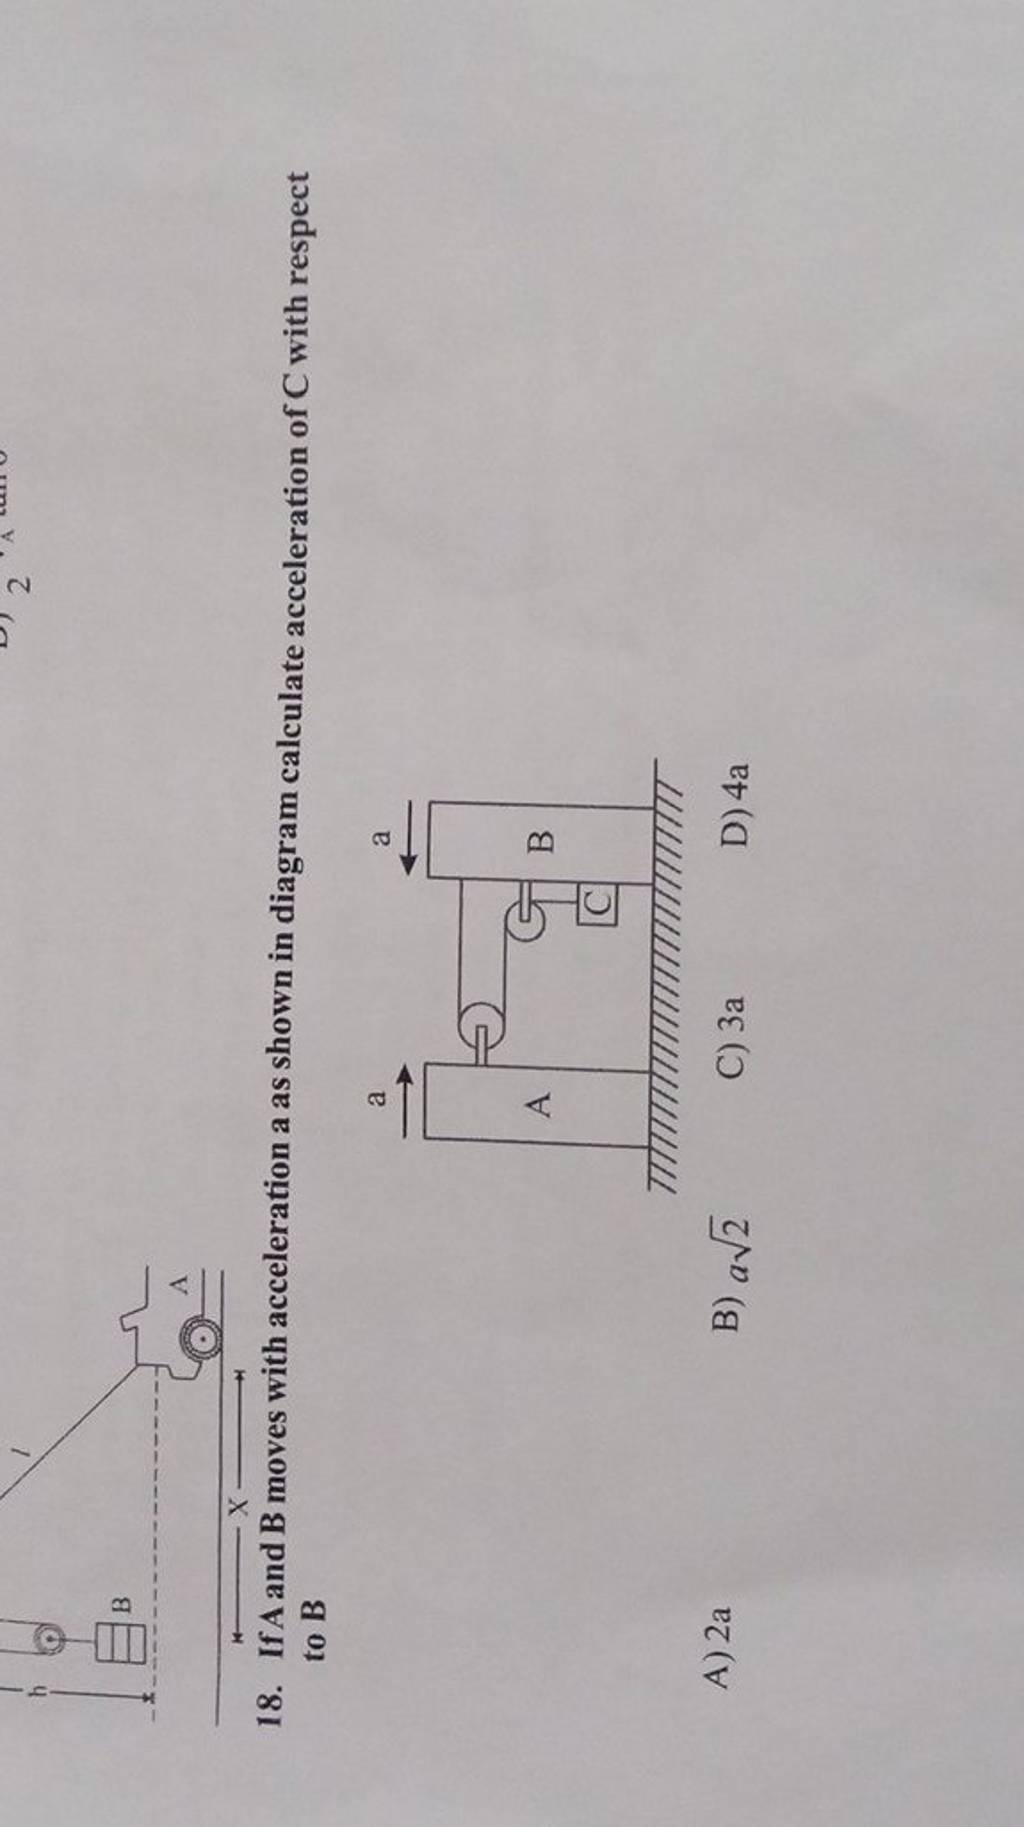 If A and B moves with acceleration a as shown in diagram calculate acc